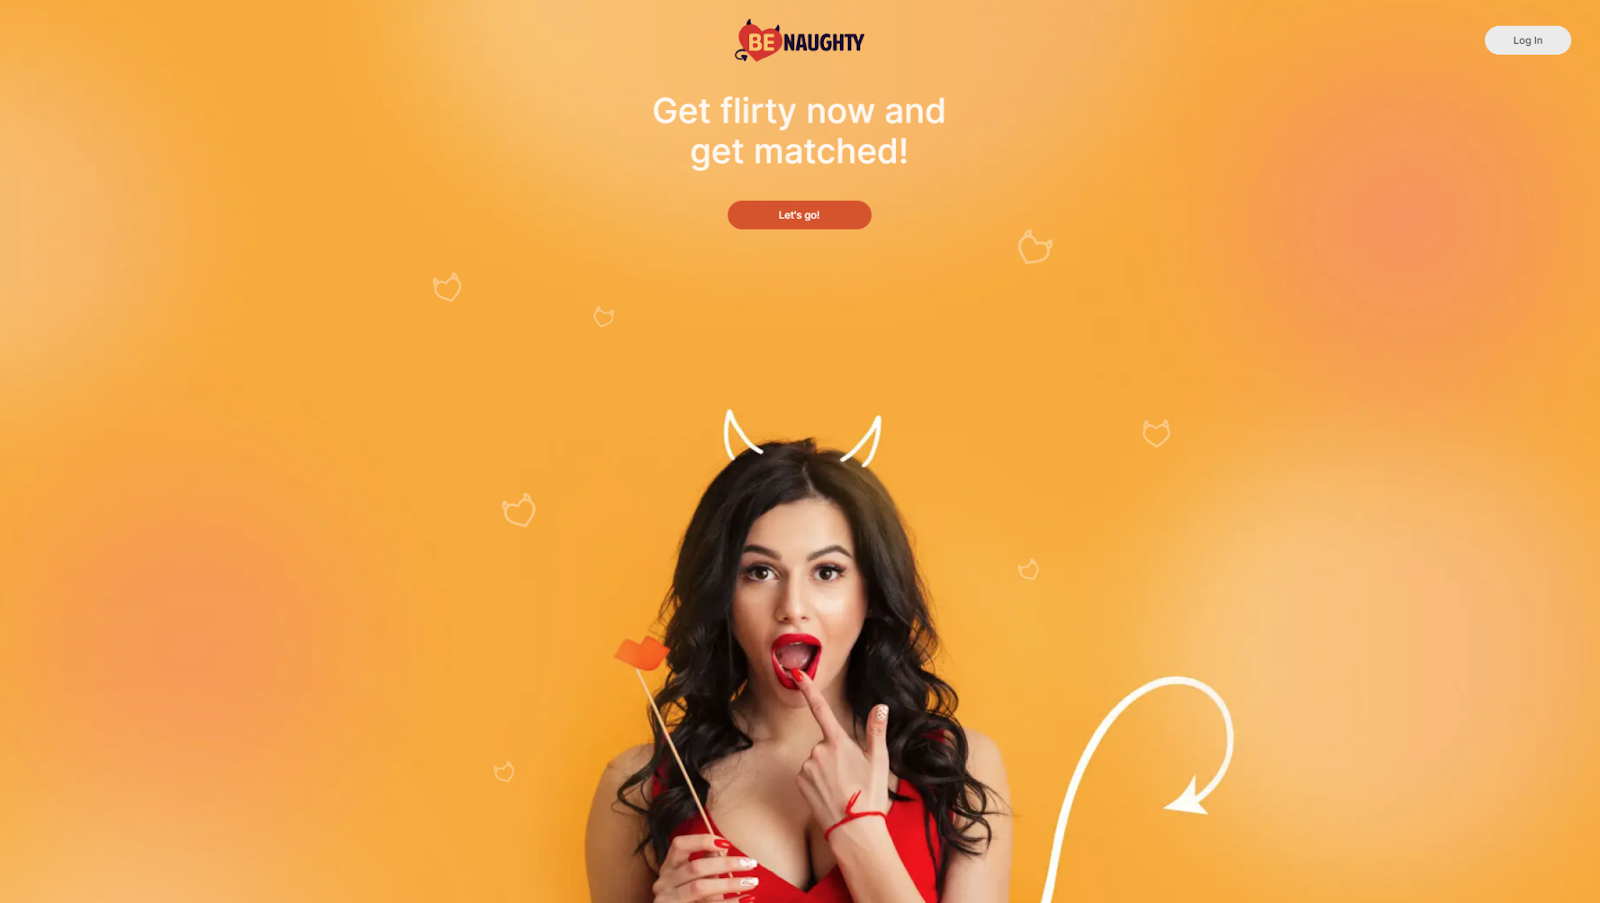 The homepage of the BeNaughty dating website. A hot brunette with red lipstick, devil's ears, and a tail is featured.